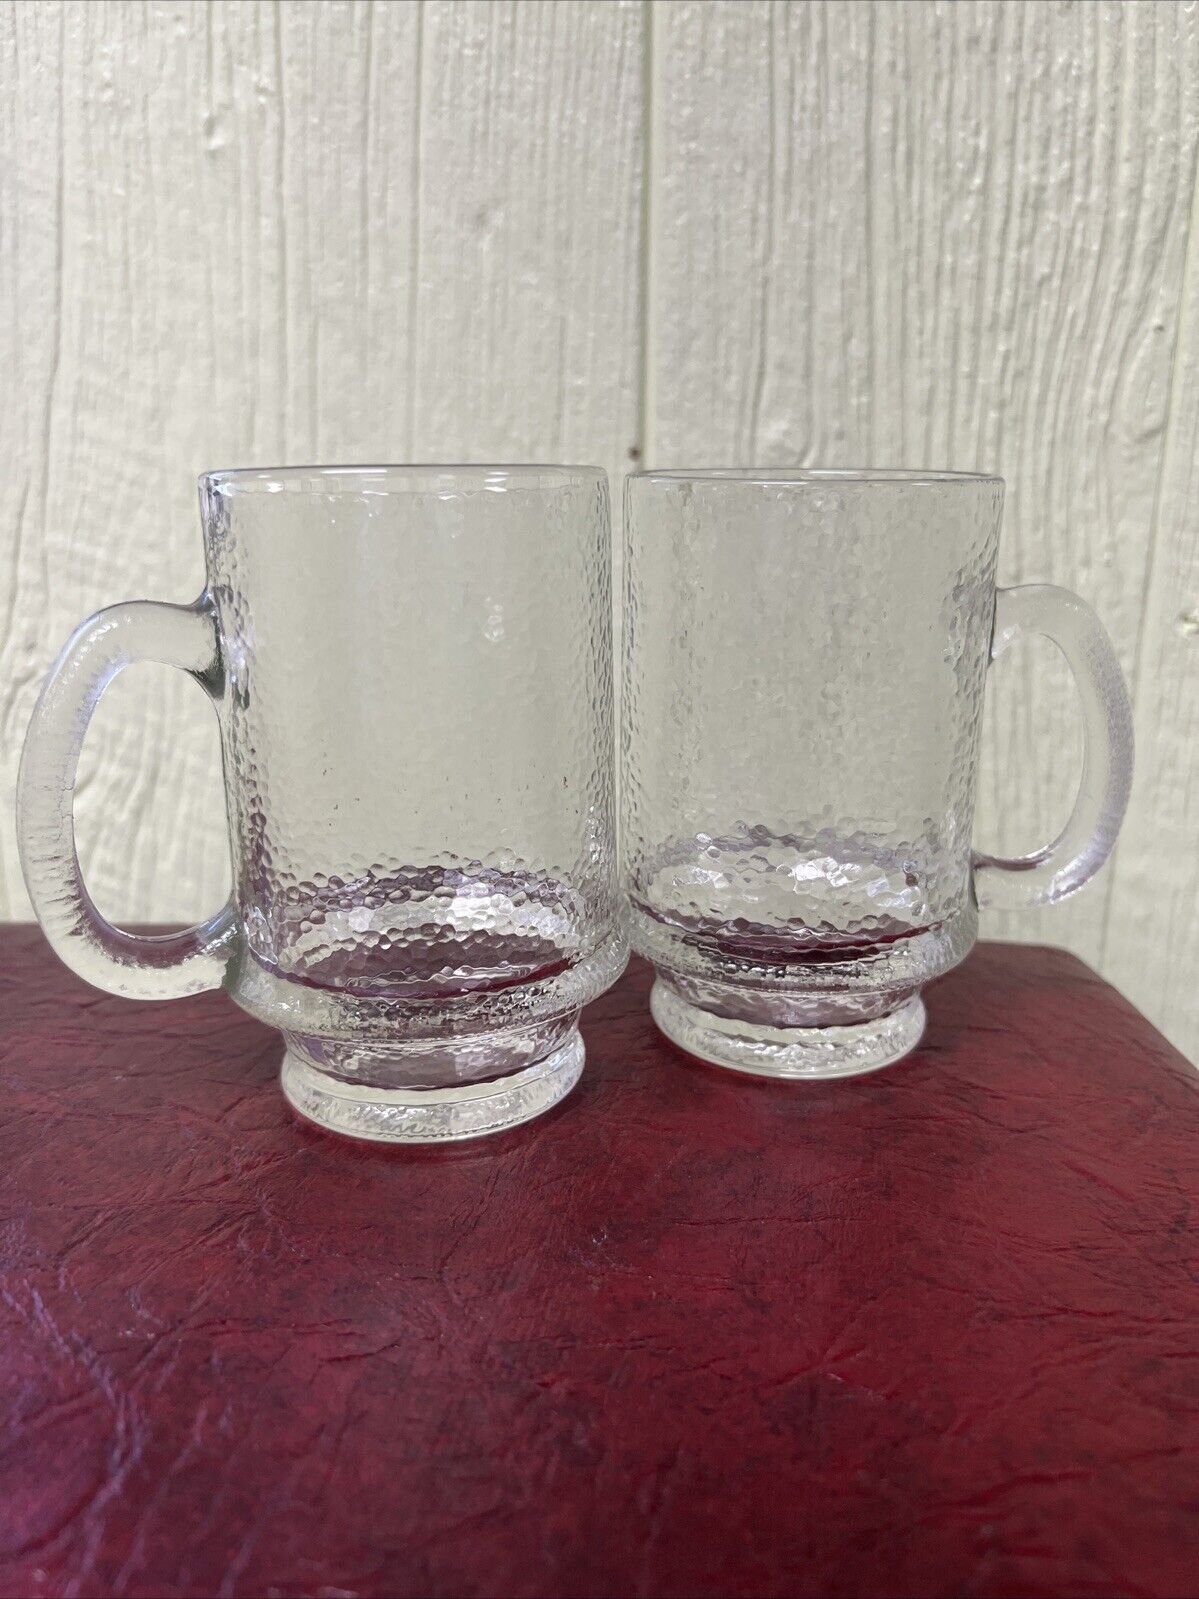 Vintage Clear Glass Dimple/Pebble Texture Coffee Cups Mug Lot Of 2